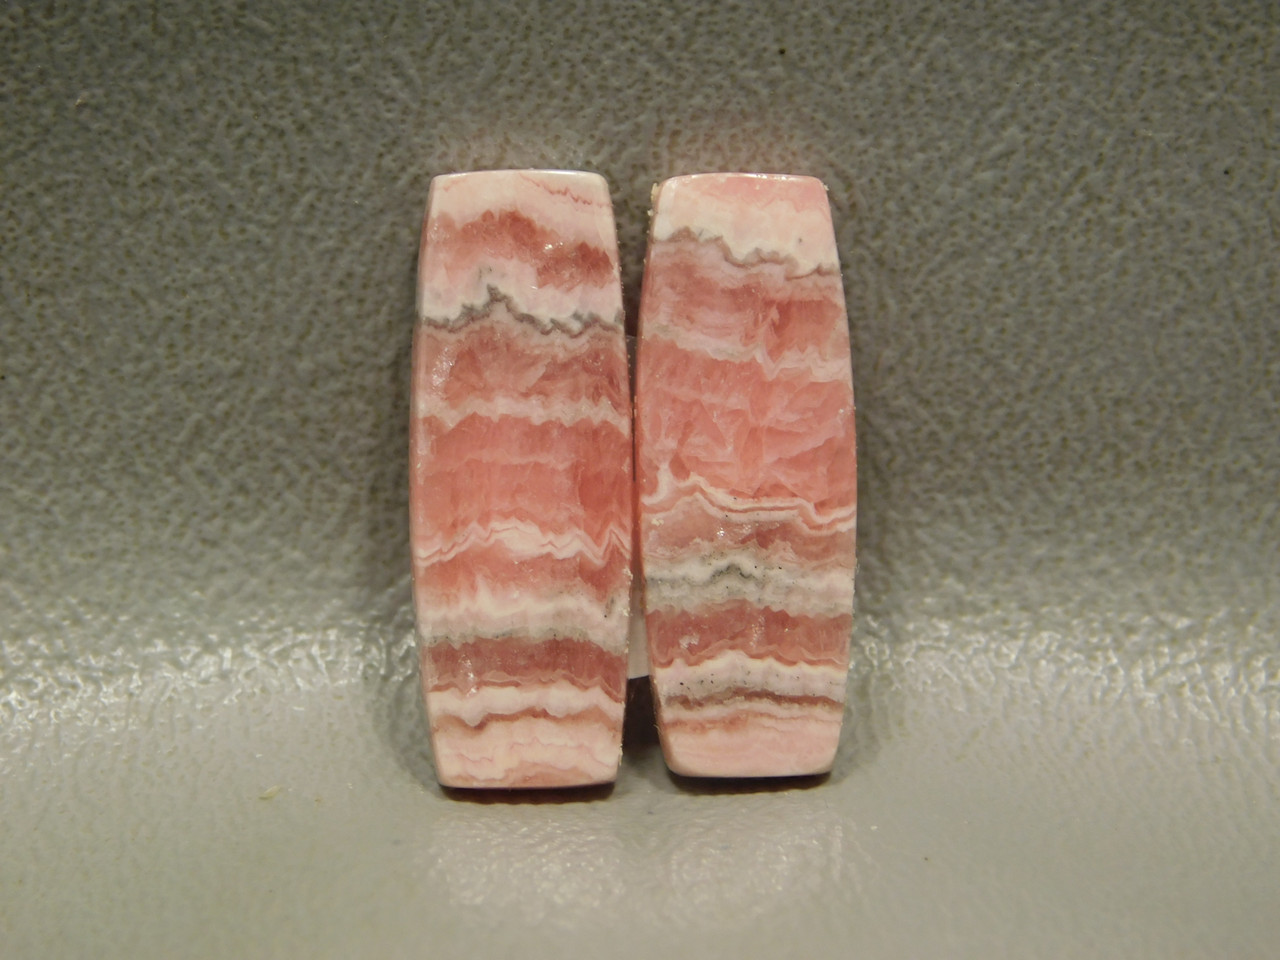 Pink Cabochons Rectangles Stones Rhodochrosite Matched Pair #16